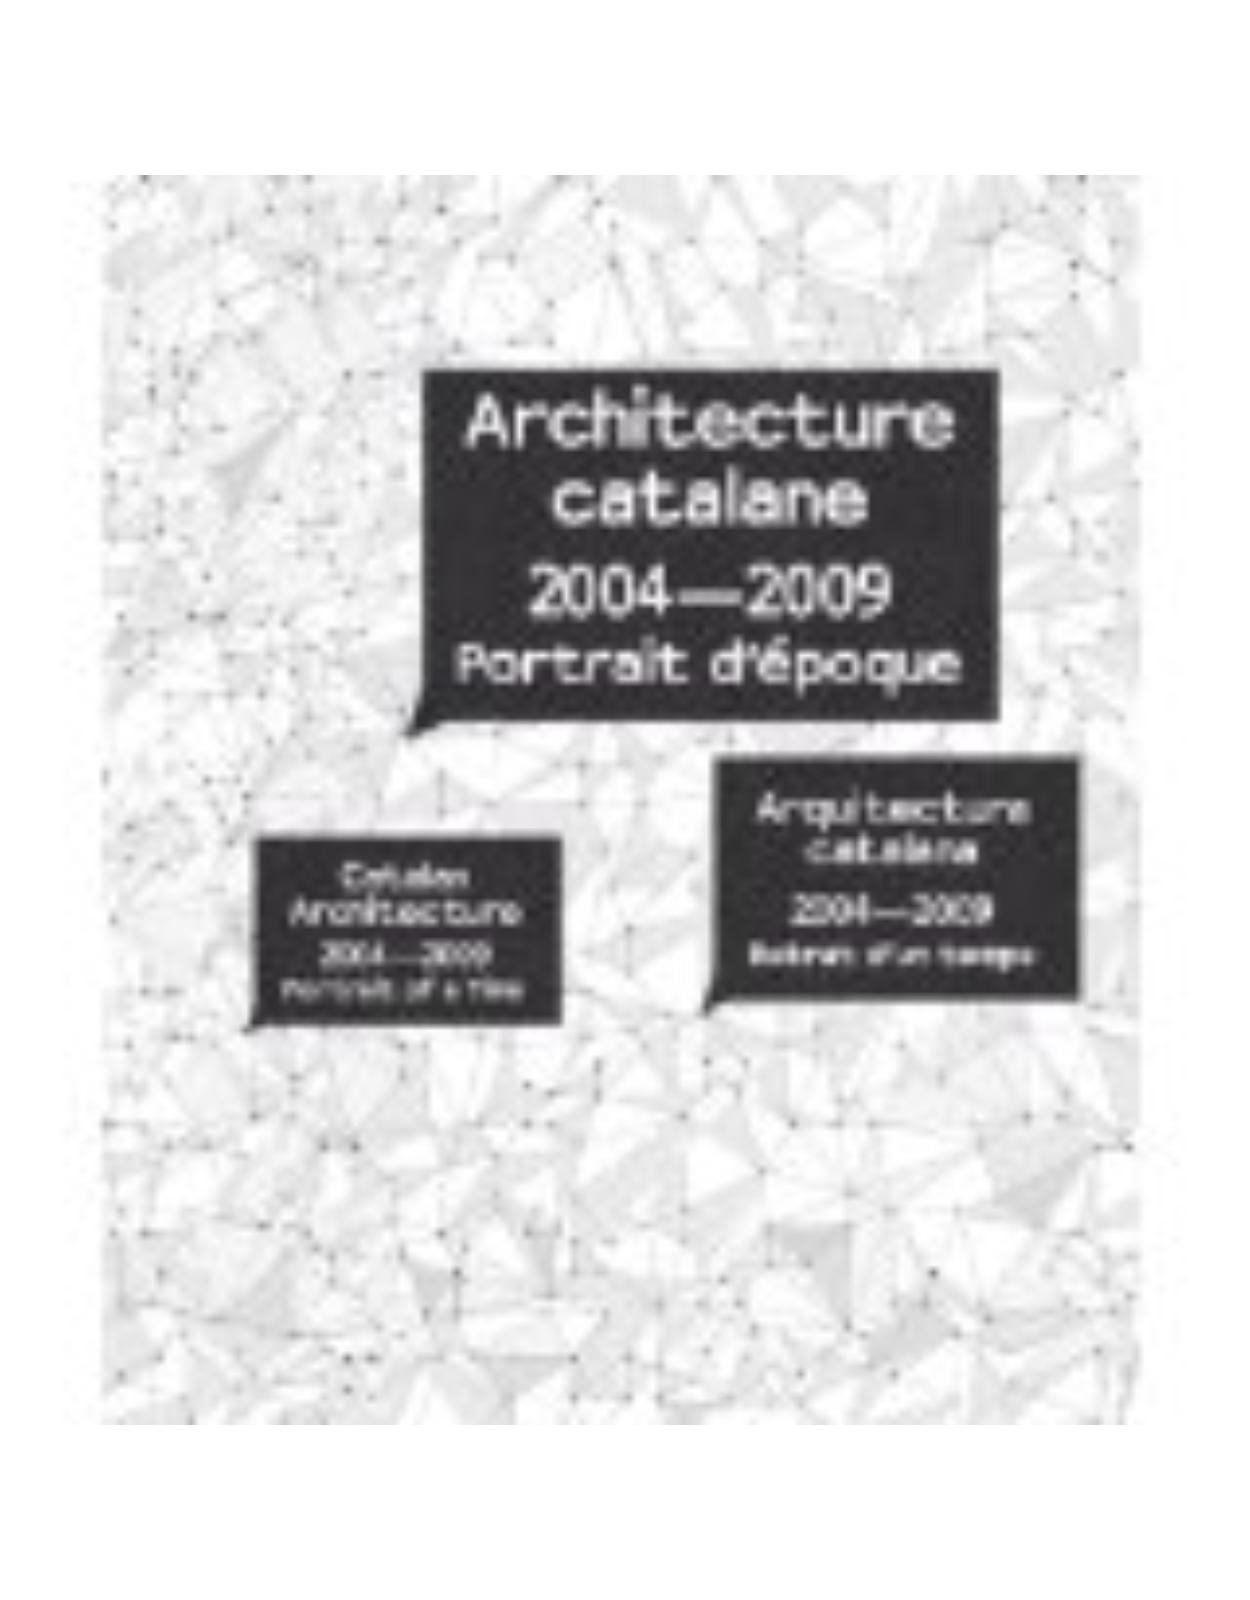 Catalan Architecture 2004-2009: Portrait of a Time (French Edition)